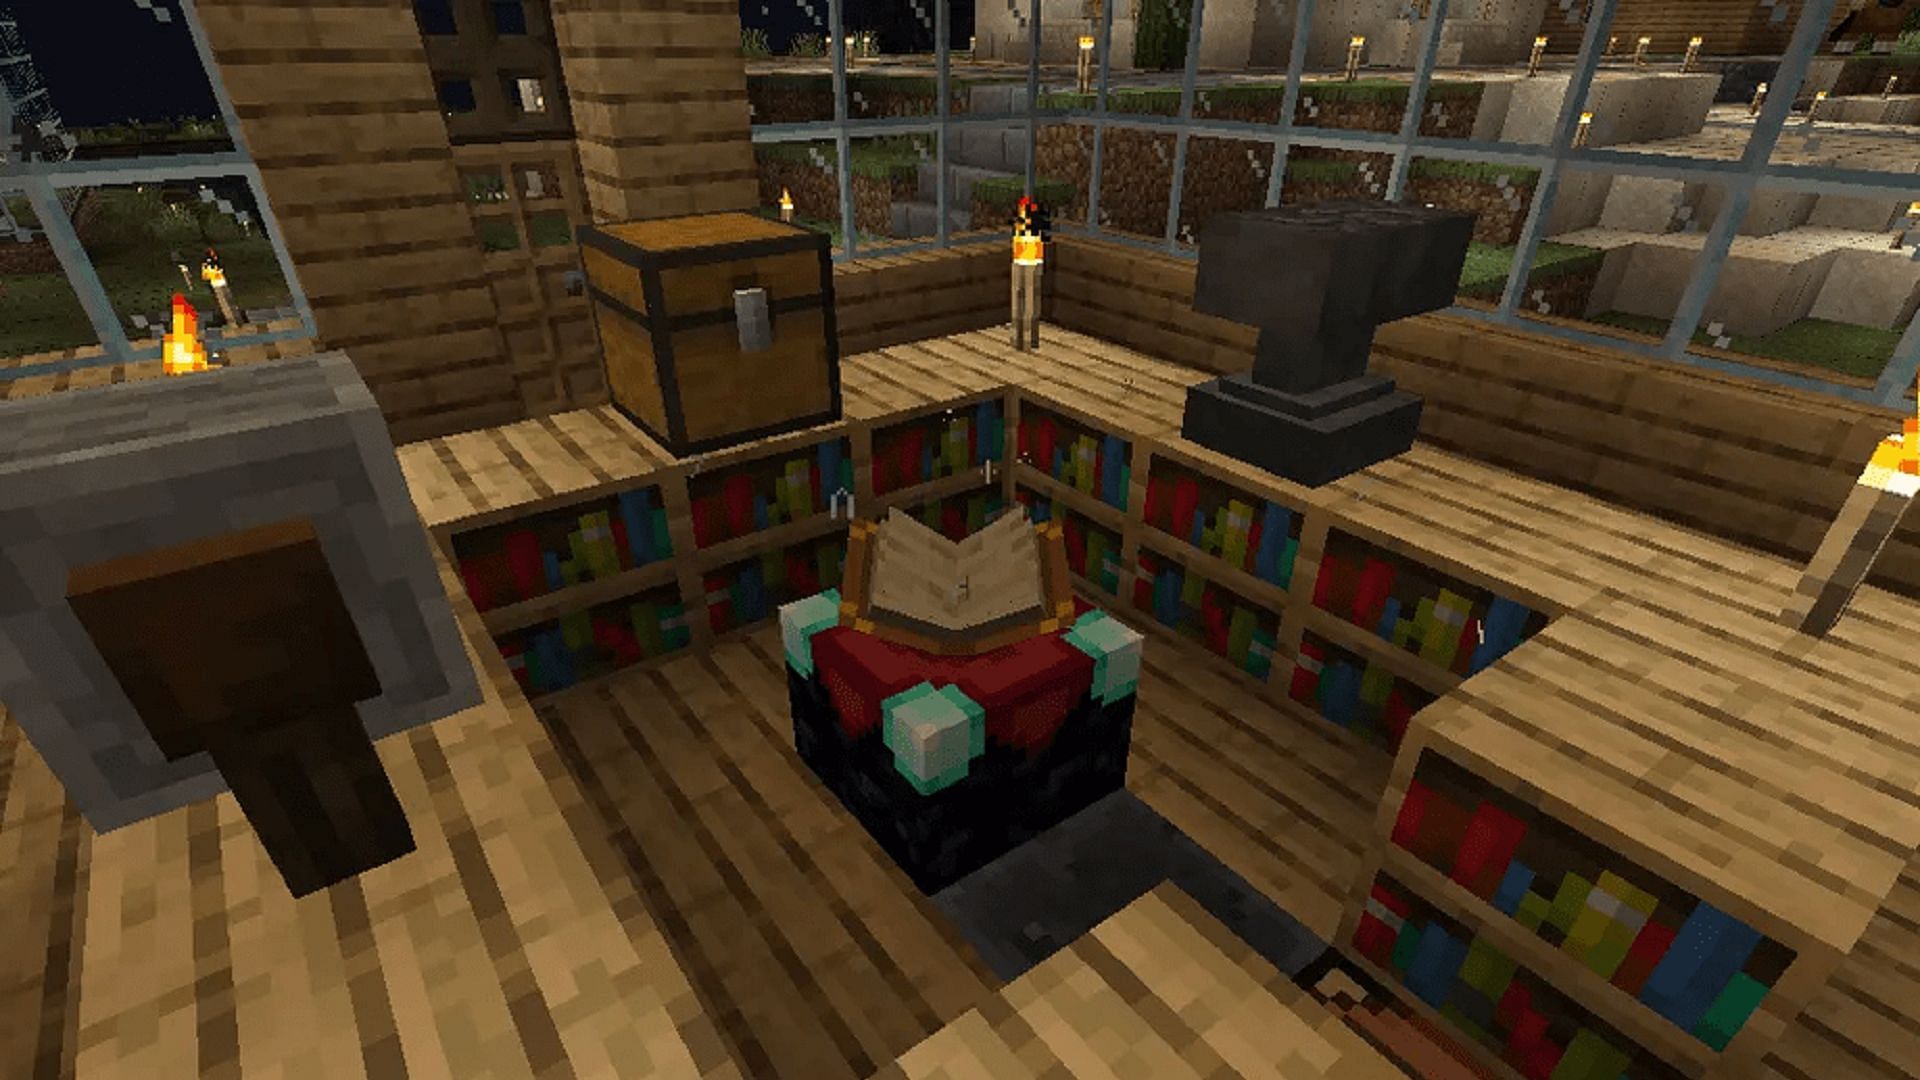 Enchanting tables are one way to acquire enchantments in Minecraft (Image via Mojang)